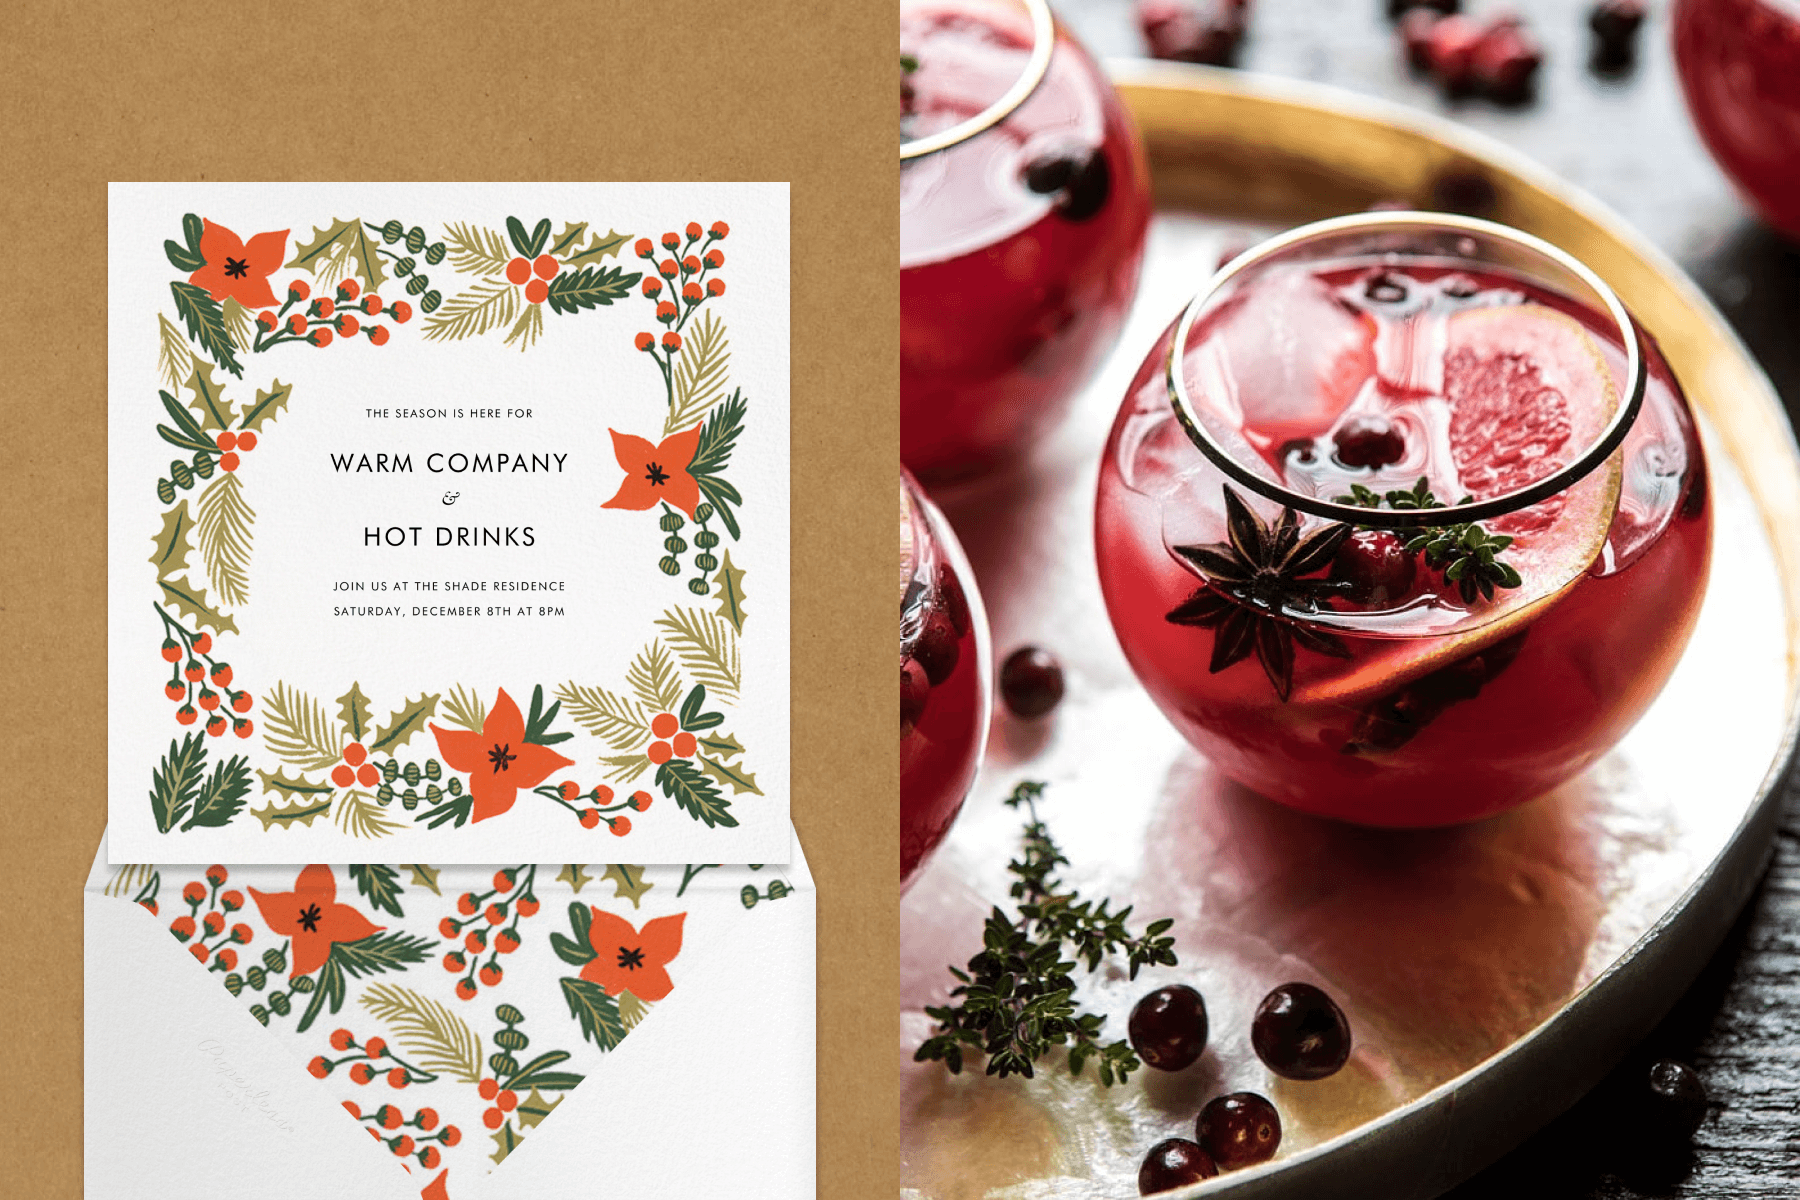 Left: An invitation for “warm company & hot drinks” has a border of poinsettia, holly berries, and gold fir branches. Right: A round, stemless glass of mulled cider filled with fruit and spices on a tray.